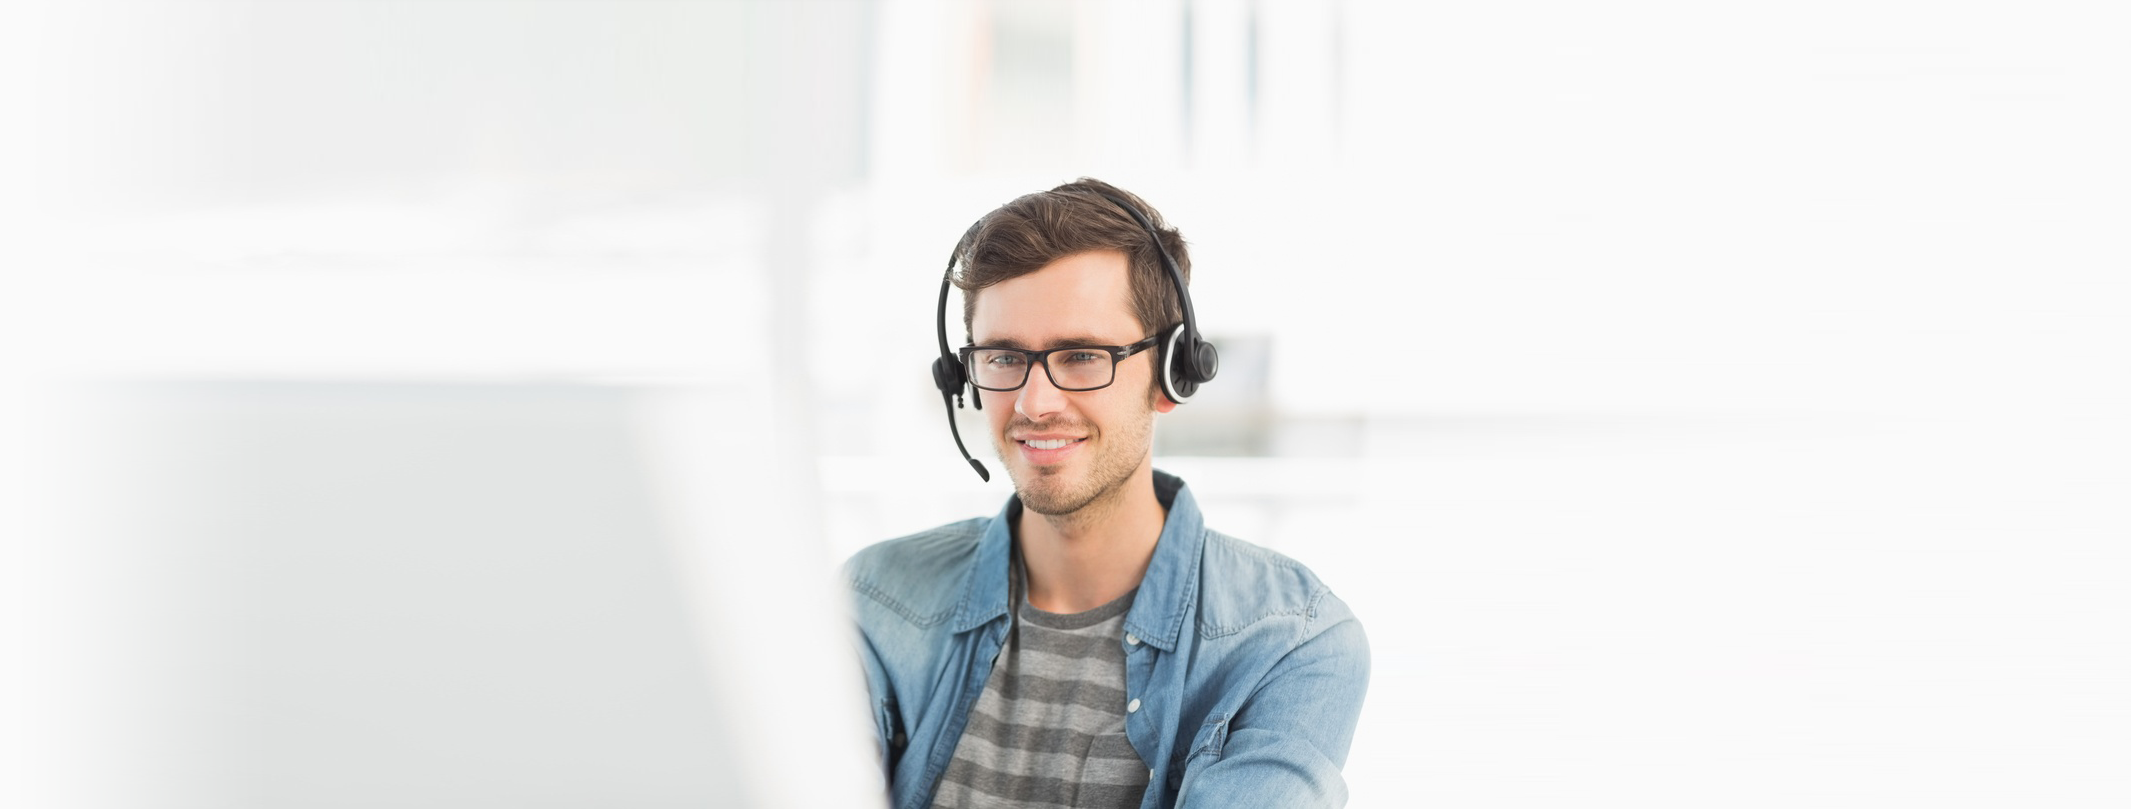 Smiling casual young man with headset using computer in a bright officev3